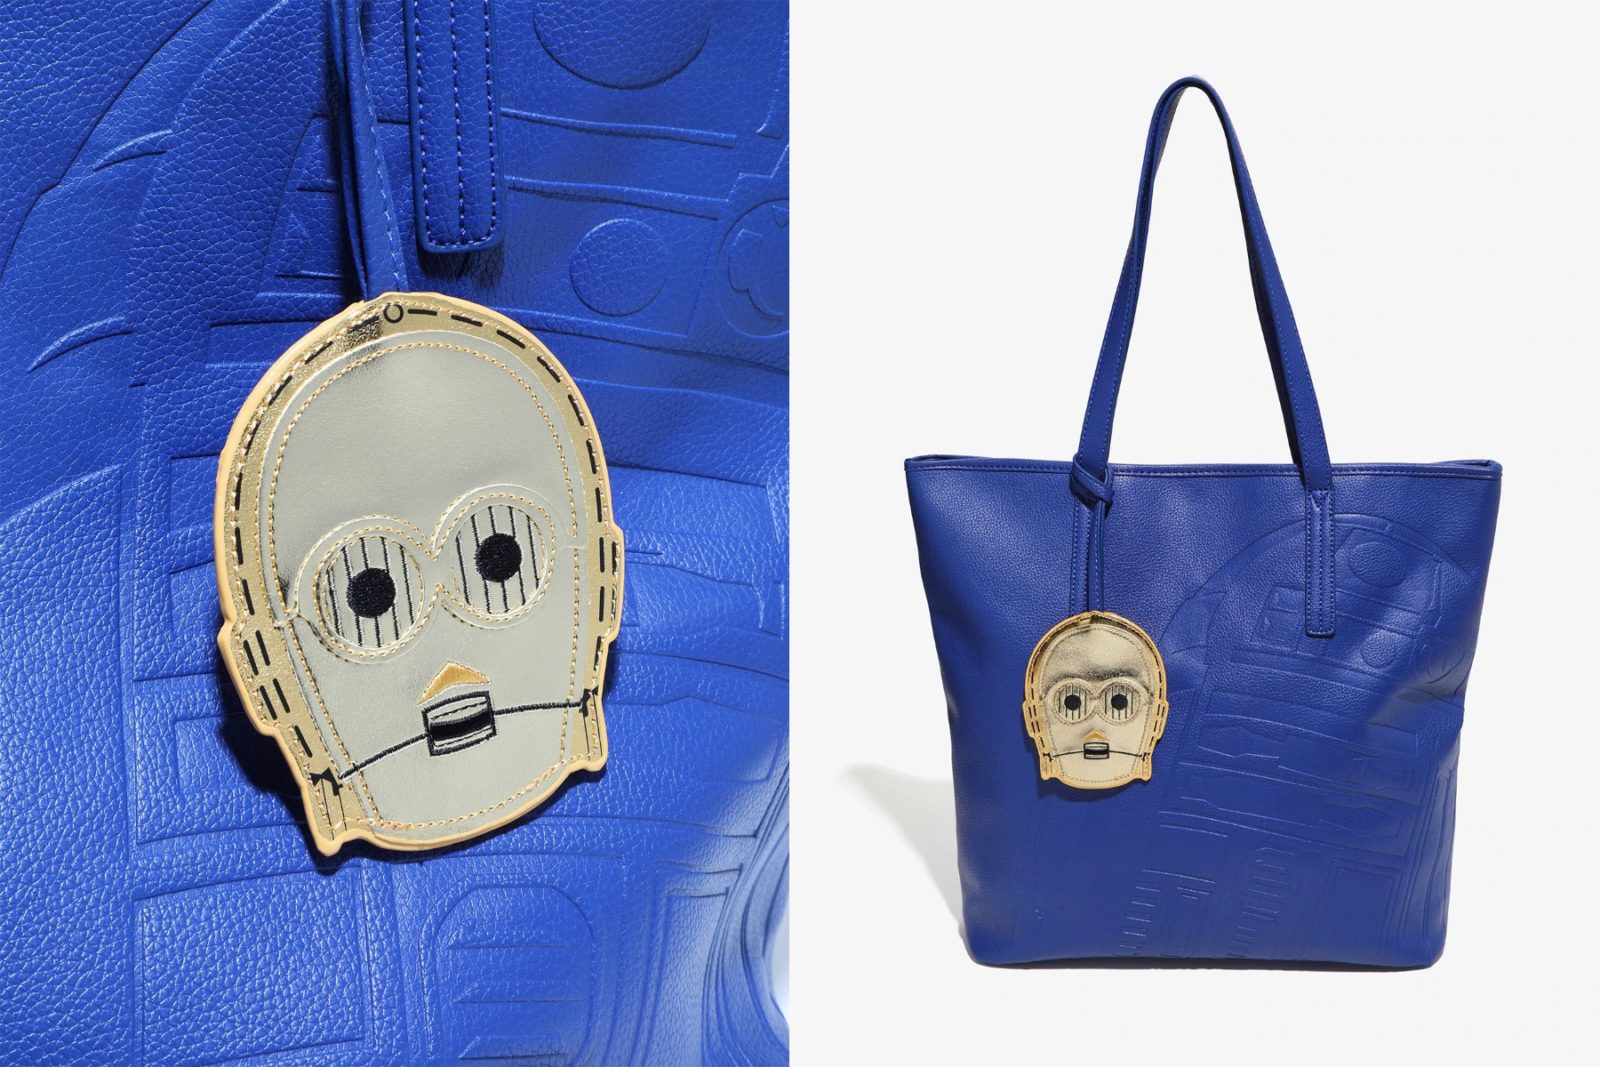 Loungefly R2-D2 Tote Bag on Sale for Half Price!